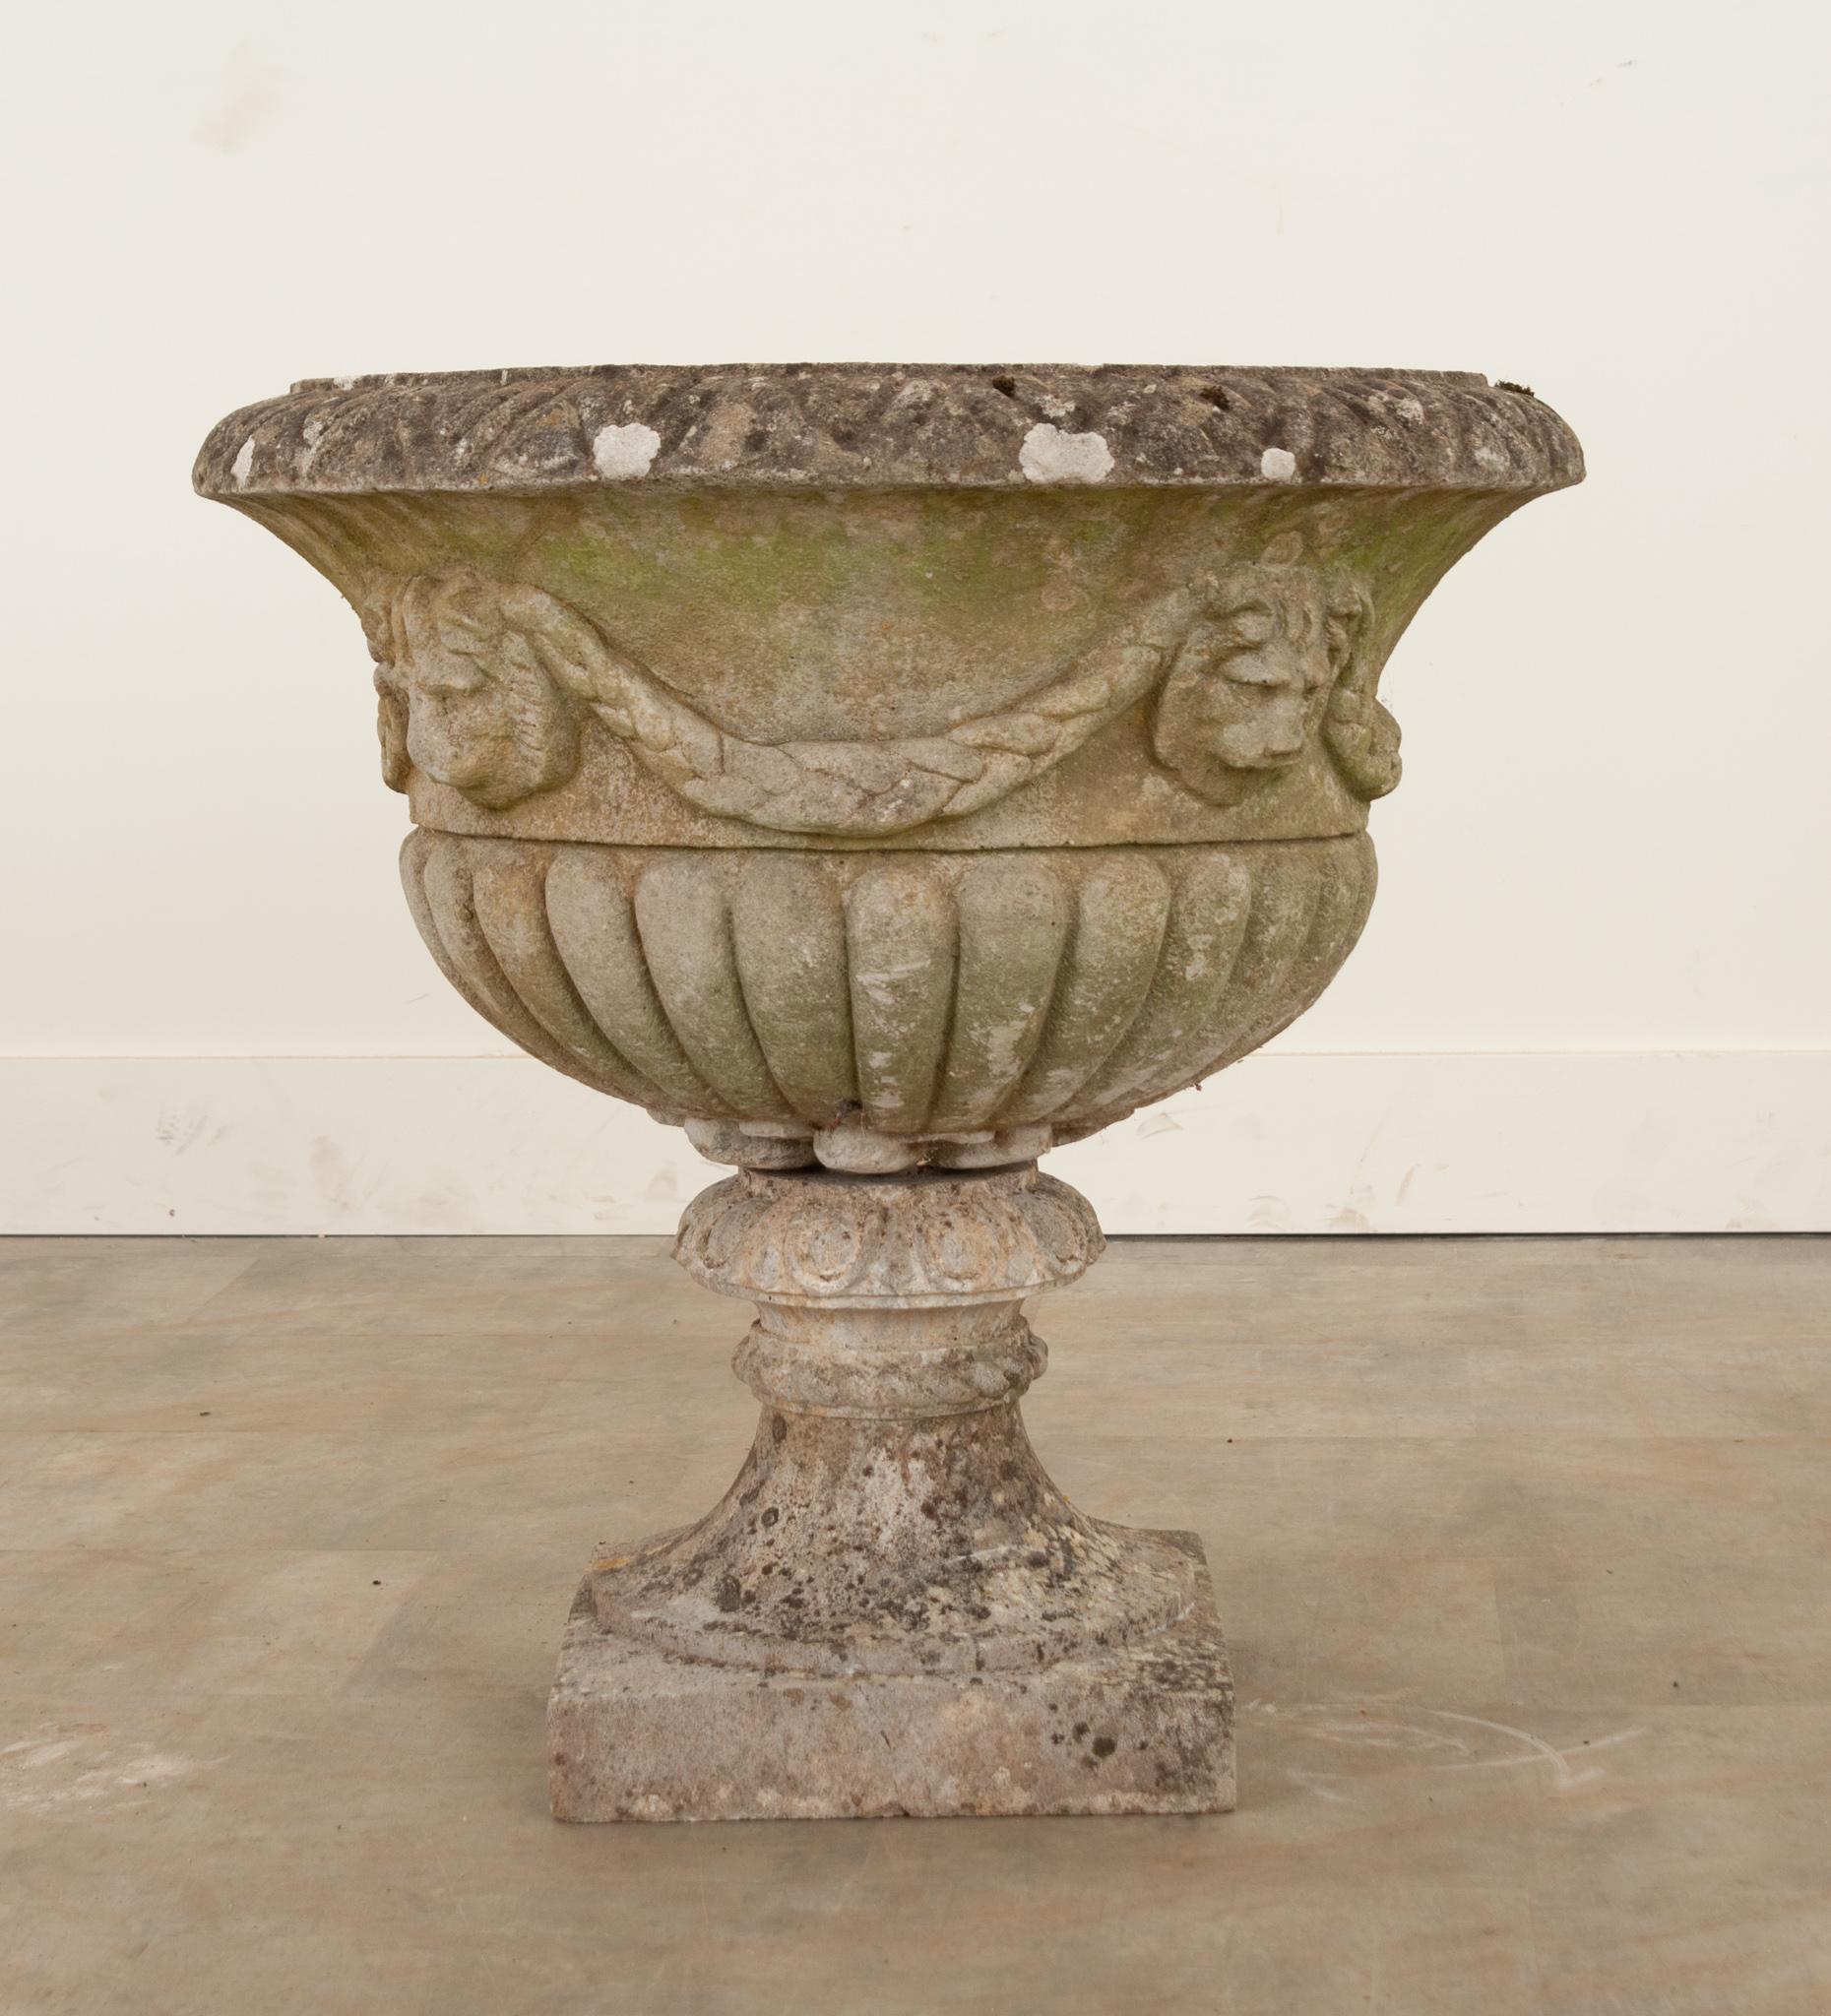 A stately stone pedestal planter from 19th century England. Ornamented with lion faces which connect with laurel swags. Holes for water drainage are present as well as a large screw for support. The top lifts from the base. It has gained a fantastic